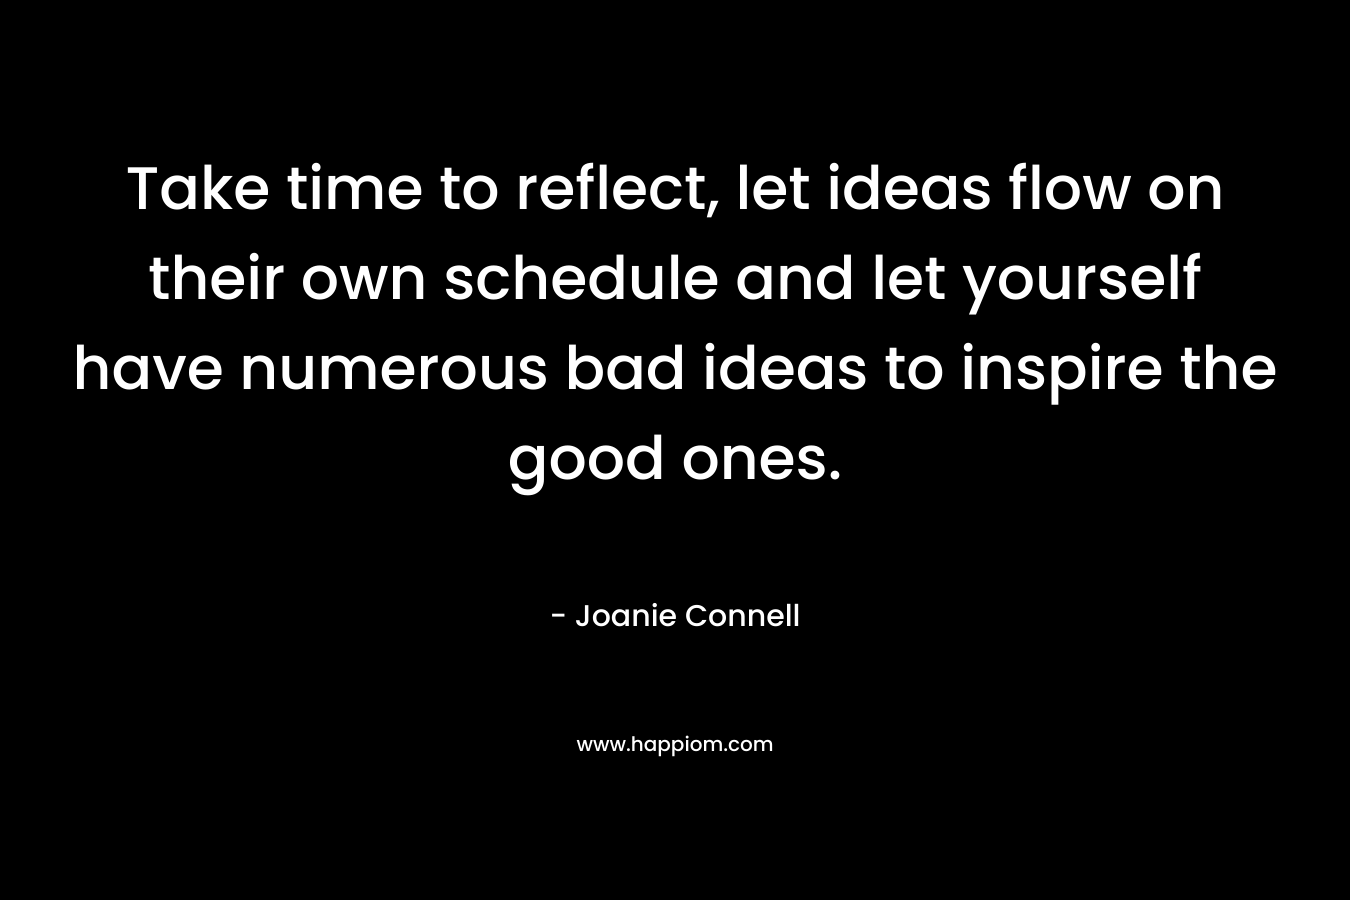 Take time to reflect, let ideas flow on their own schedule and let yourself have numerous bad ideas to inspire the good ones. – Joanie Connell